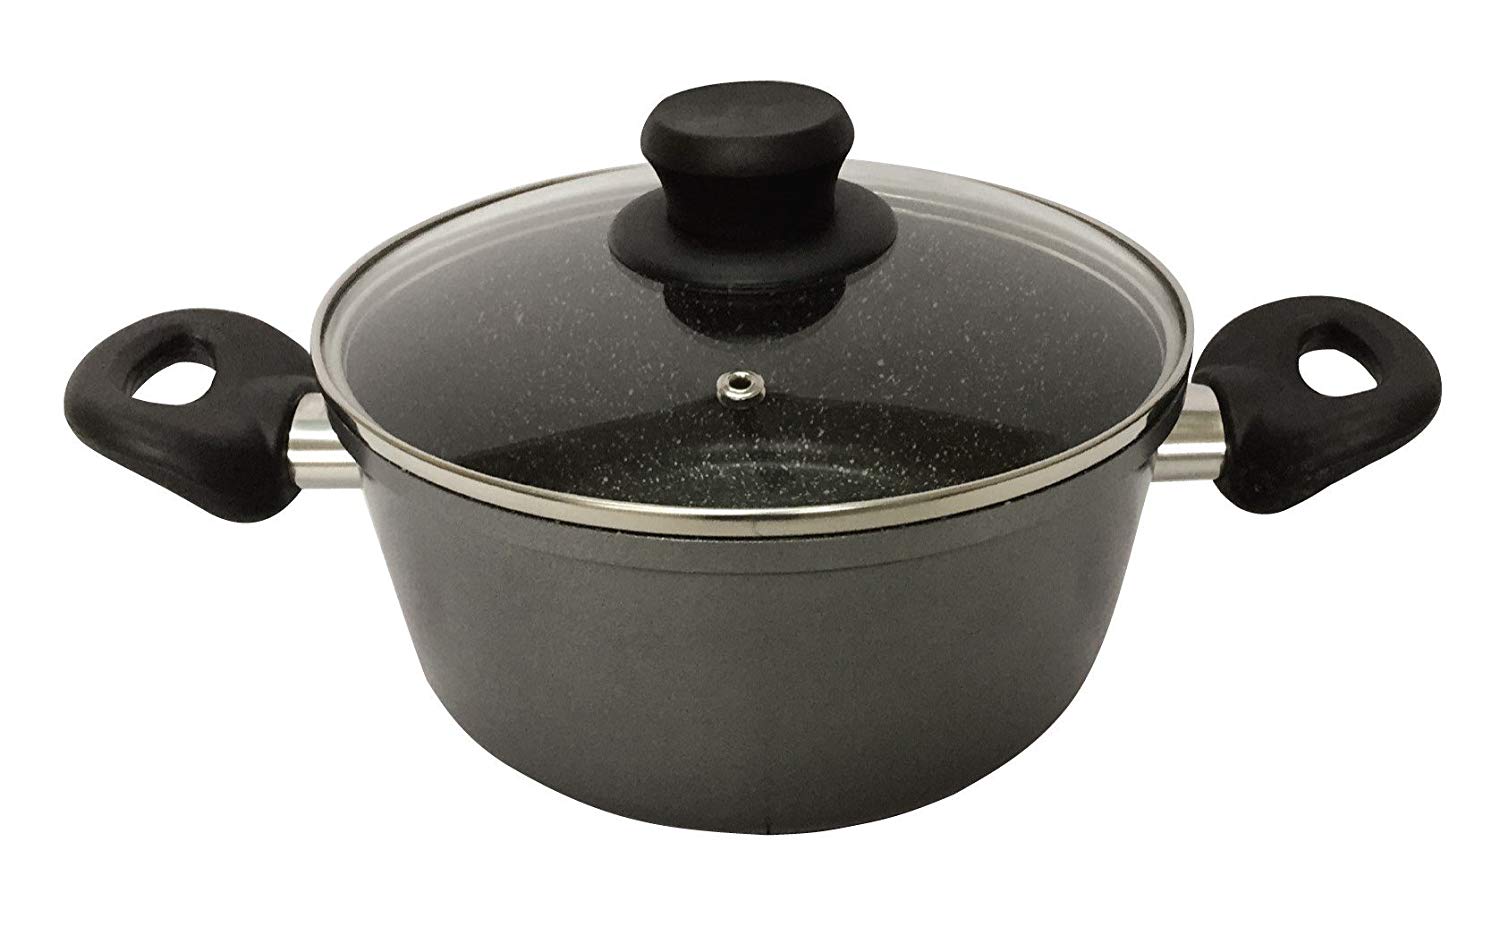 Strauss JS-TPMCA28 7.5QT Casserole Pot with Lid - Induction Ready COOKPOT